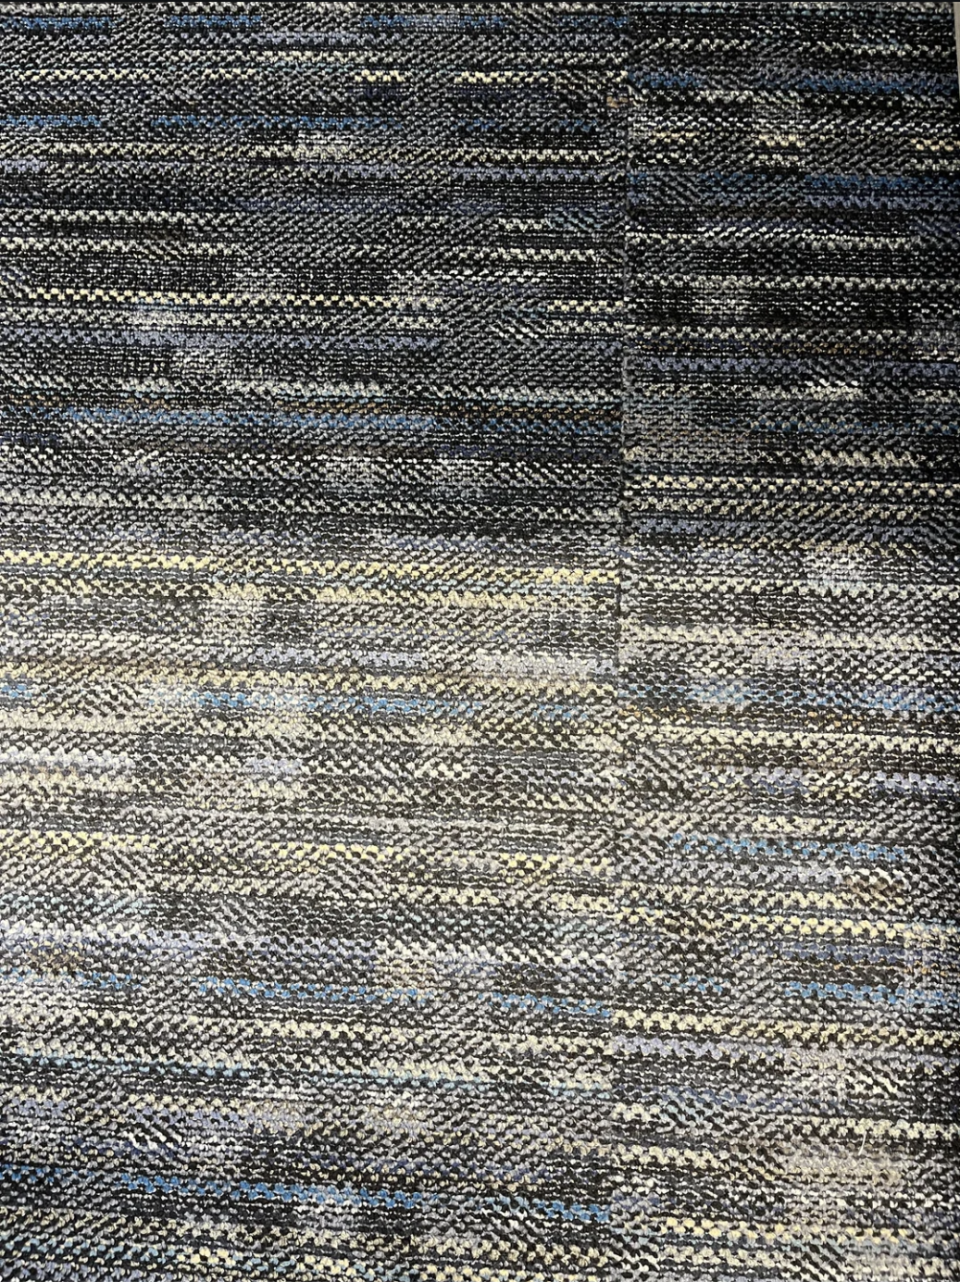 Close-up of a patterned carpet